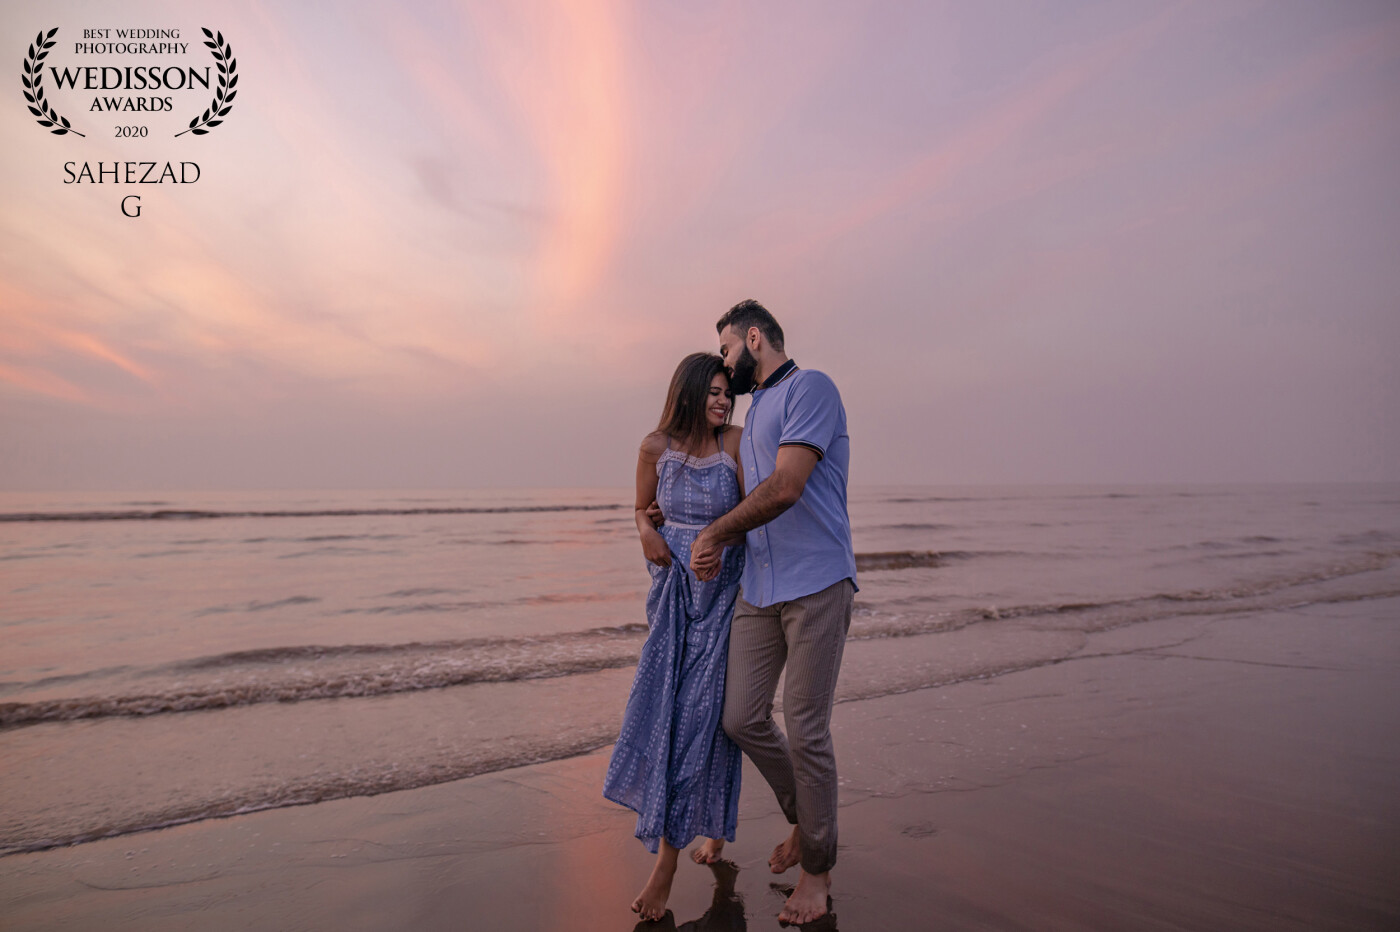 Words aren’t enough to express this moment. It was a late evening at the beach, the sun was about to set and was living the sky with its shiny orange glacier. We were living the best part of our lives and cherish our relationship.